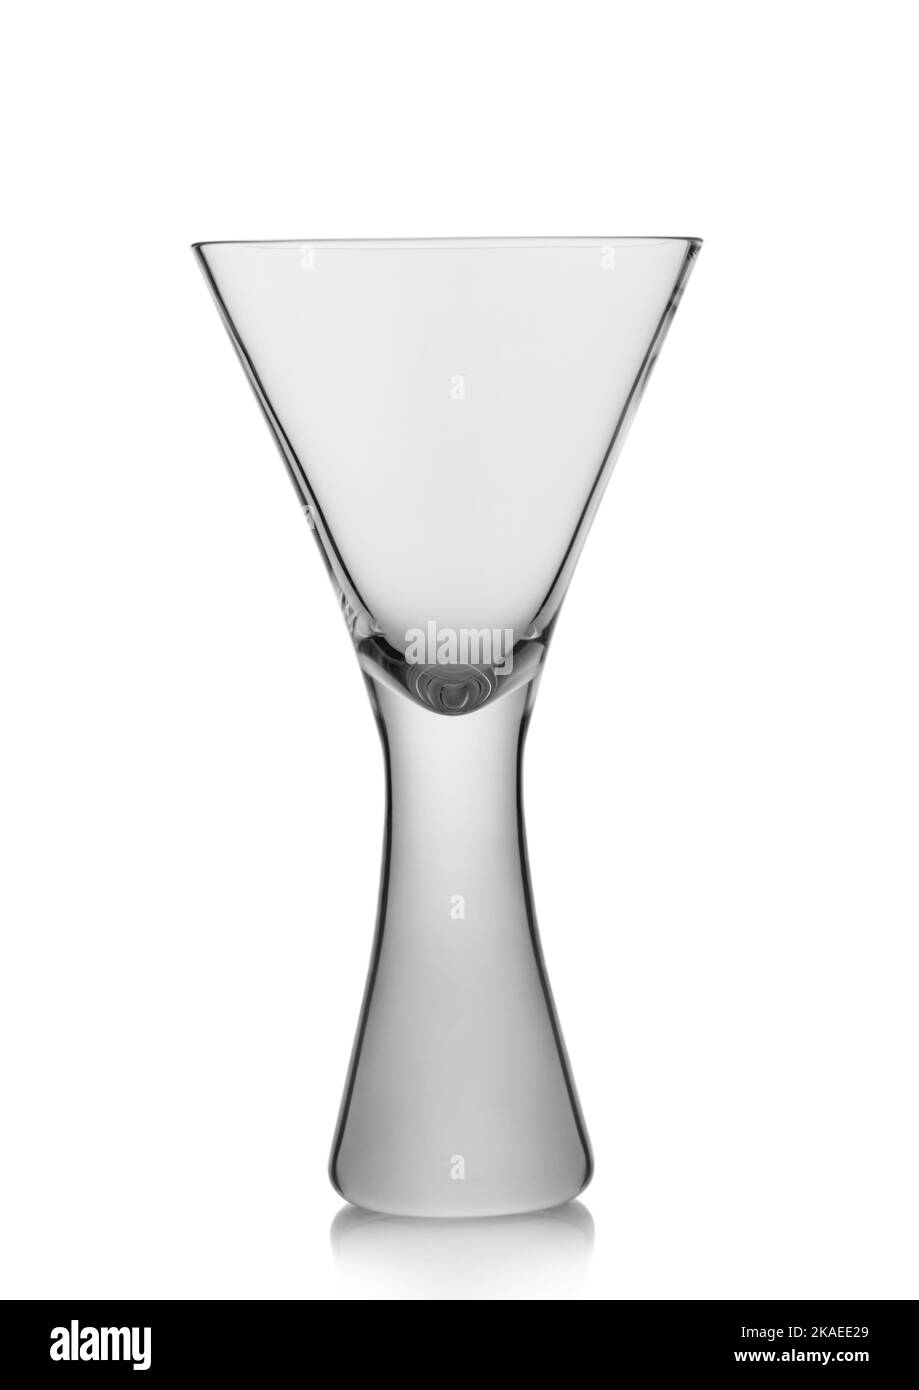 Mouth Blown glass for wine or champagne from wine glass on white. Stock Photo